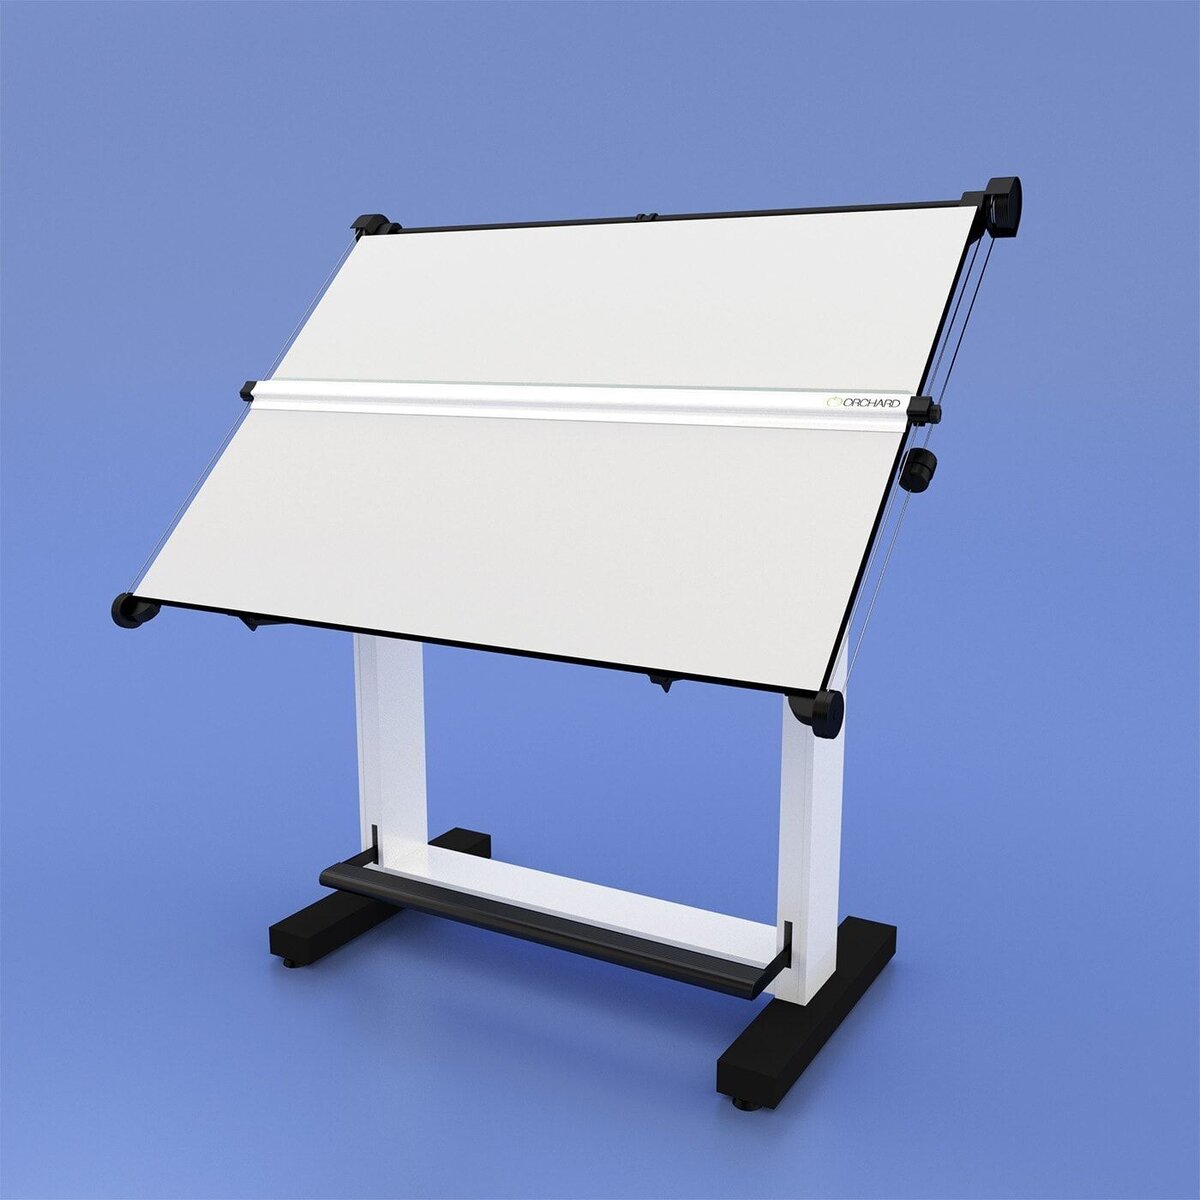  A3 Portable Drawing Board, Multi-Function Metric